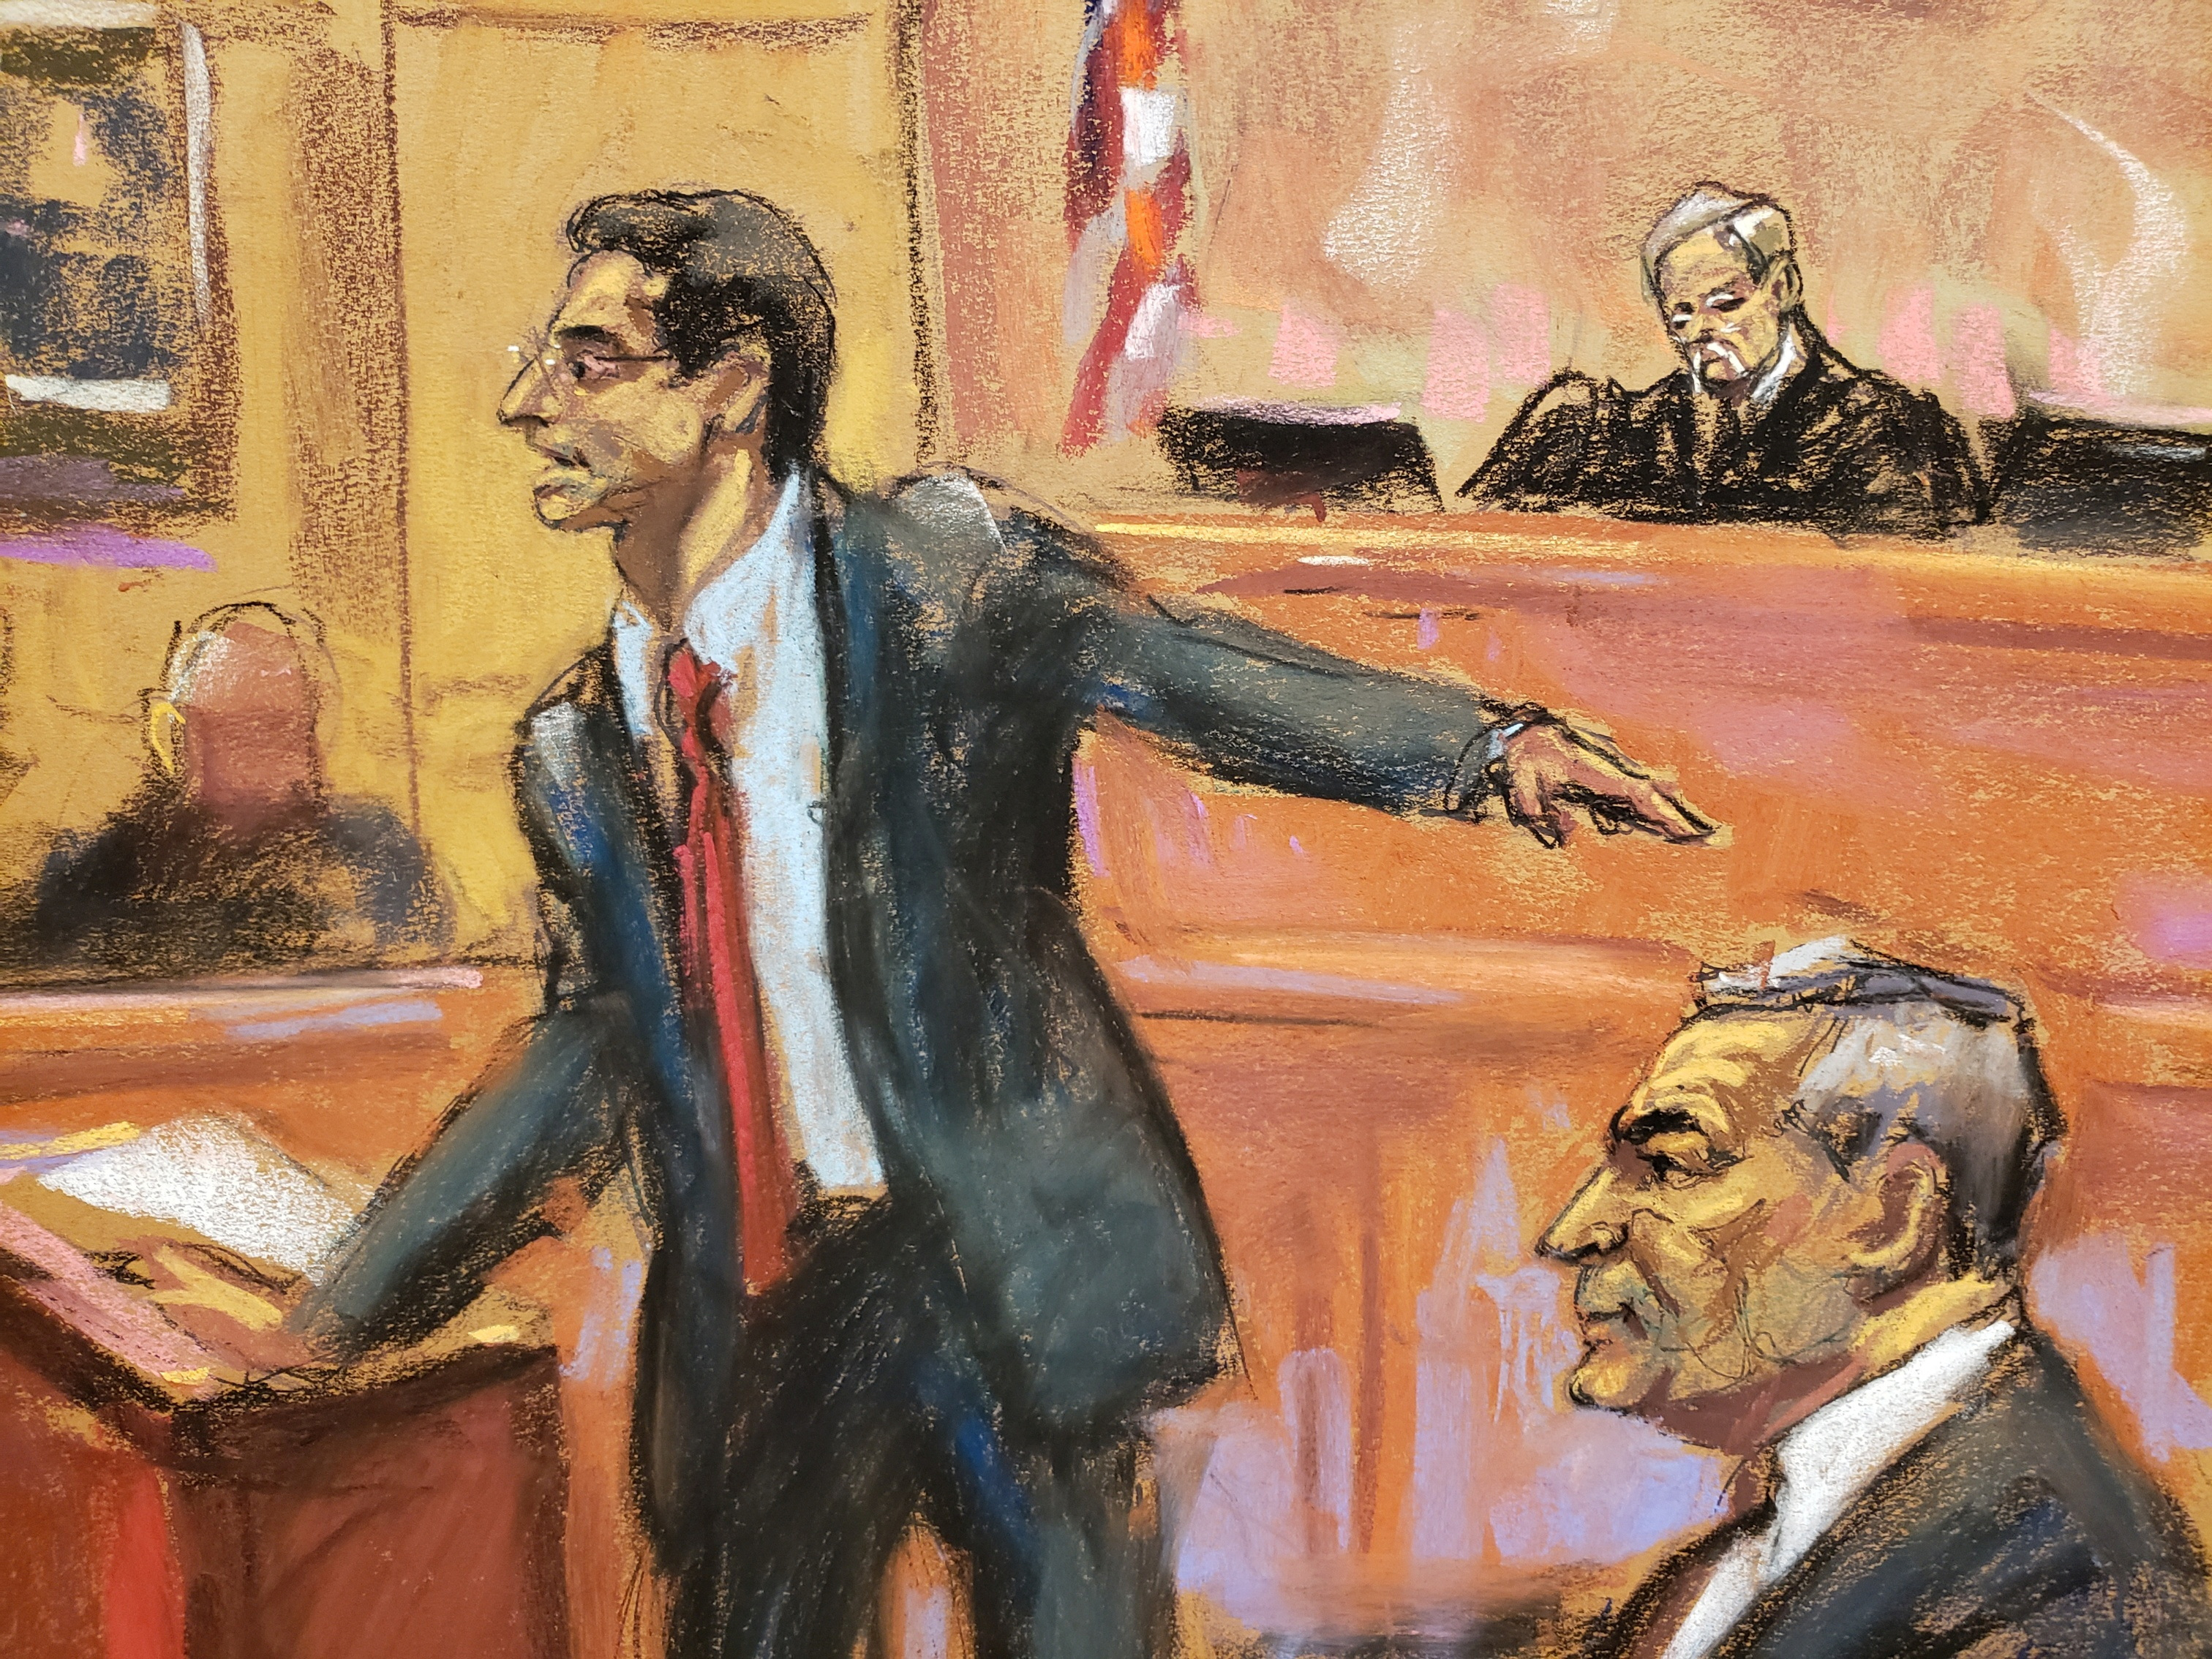 Prosecutor Philip Pilmar points at Mexico's former Public Security Minister Genaro Garcia Luna during opening arguments in Garcia Luna's trial on charges that he accepted millions of dollars to protect the powerful Sinaloa Cartel, once run by imprisoned drug lord Joaquin "El Chapo" Guzman, at a courthouse in New York City, U.S., January 23, 2023 in this courtroom sketch. REUTERS/Jane Rosenberg